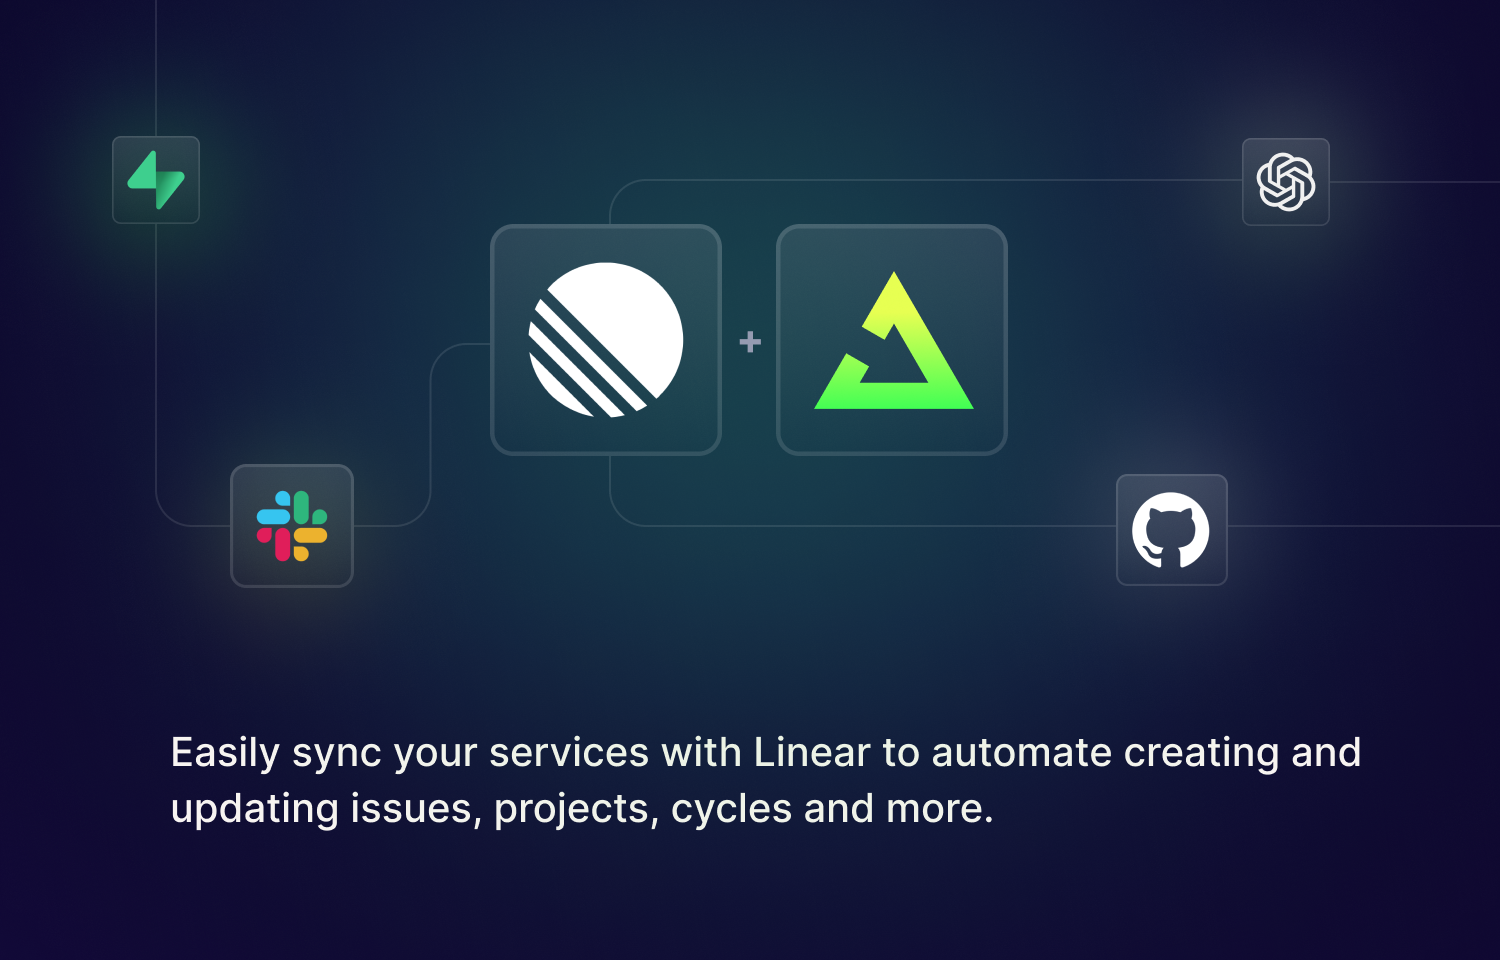 Linear and Trigger.dev logos together showing that you can sync them together